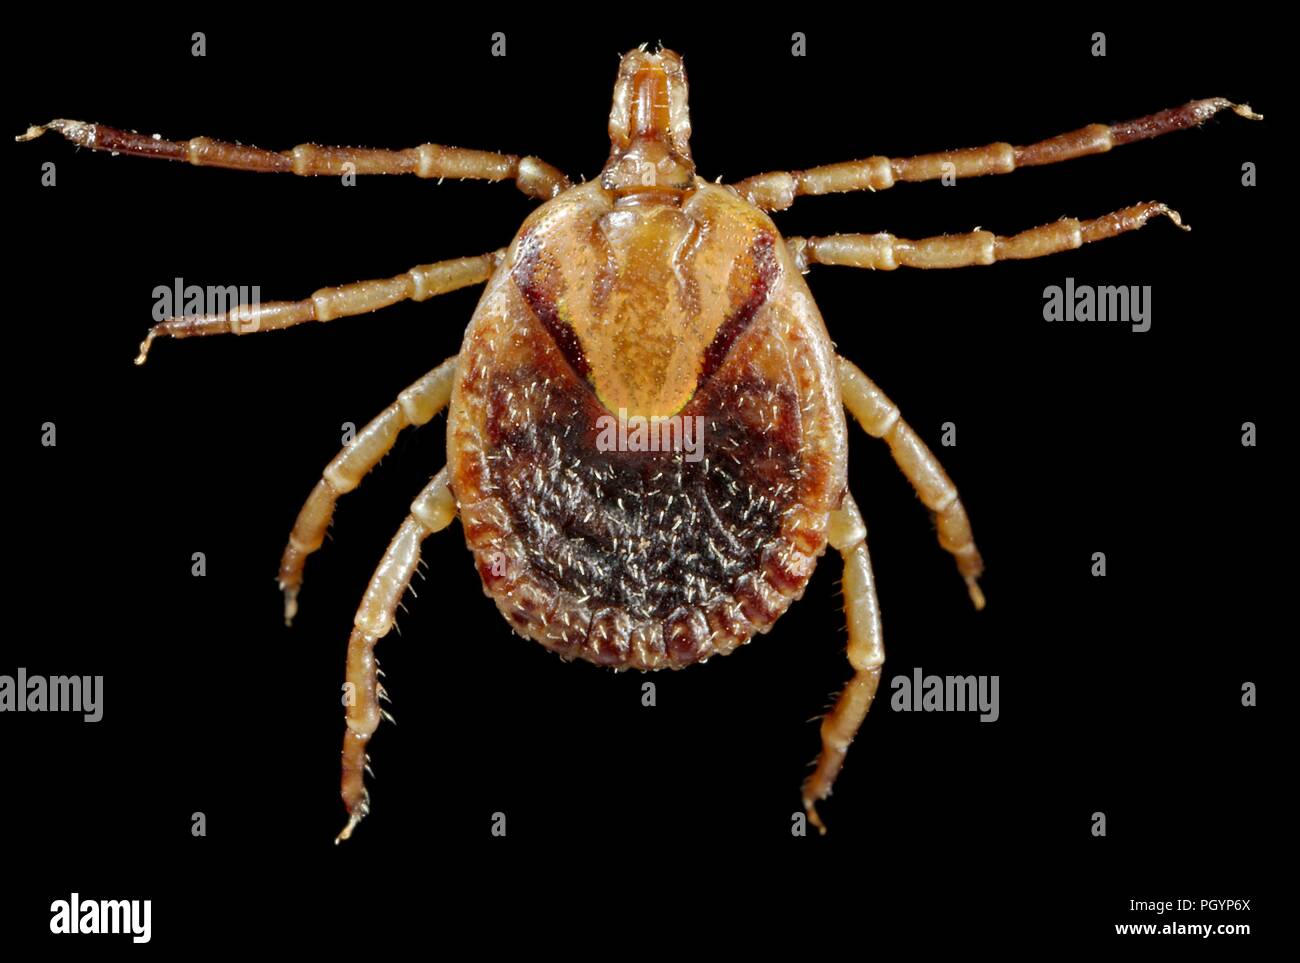 Photograph showing the dorsal view of a brown and cream colored female Cayenne tick (Amblyomma cajennense) an agent of Rocky Mountain spotted fever (RMSF) on a black background, image courtesy CDC/Dr Christopher Paddock, 2008. () Stock Photo